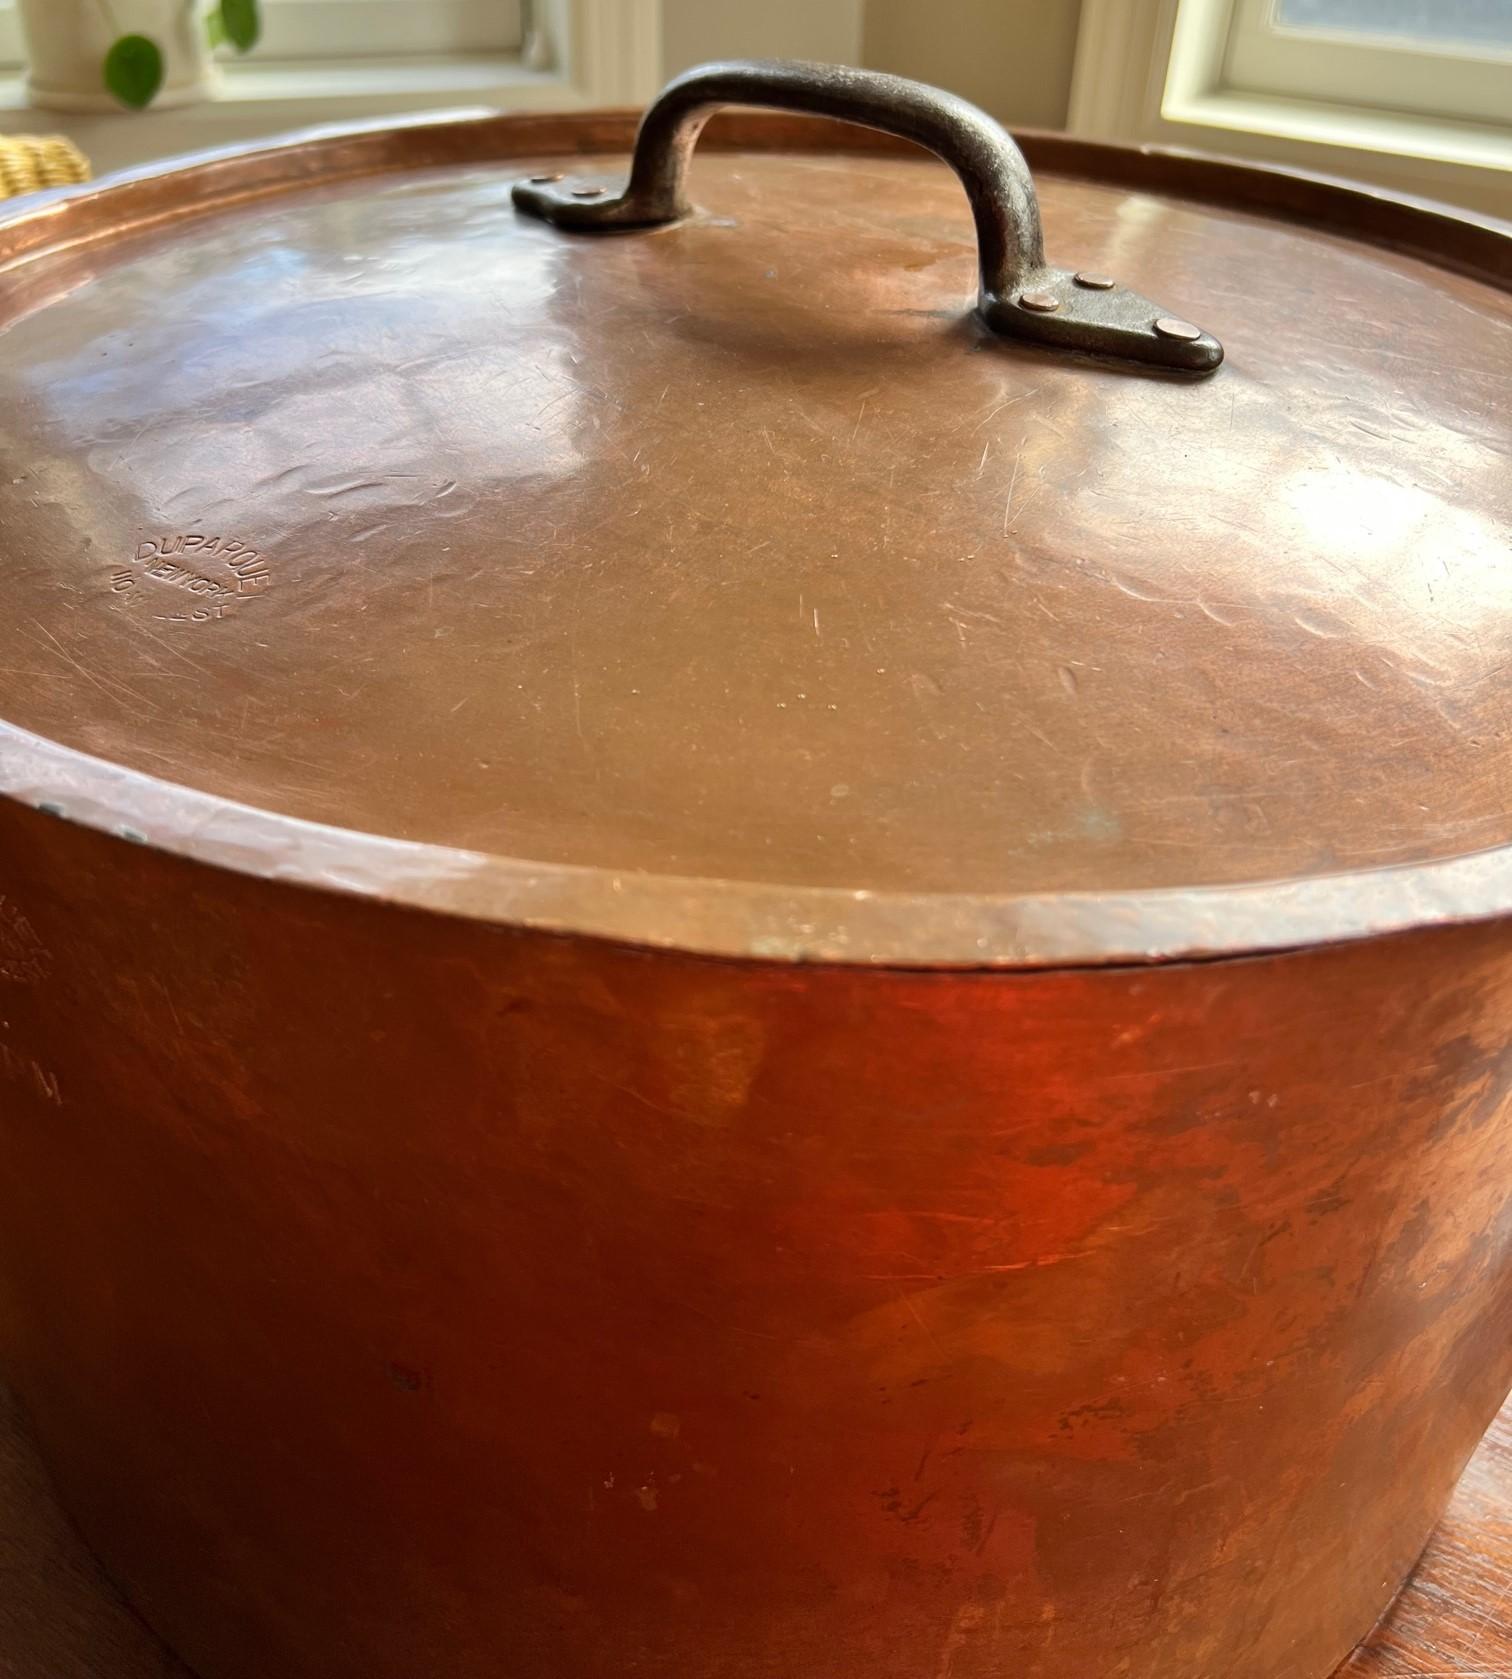 Circa early 20th C, New York, from Duparquet, 110 W 22nd St, an enormous and heavy (40lbs) copper stock pot with two wrought iron handles and a fitted lid with a top wrought iron handle. 

The Duparquet stamp is evident on two sides of the pot and